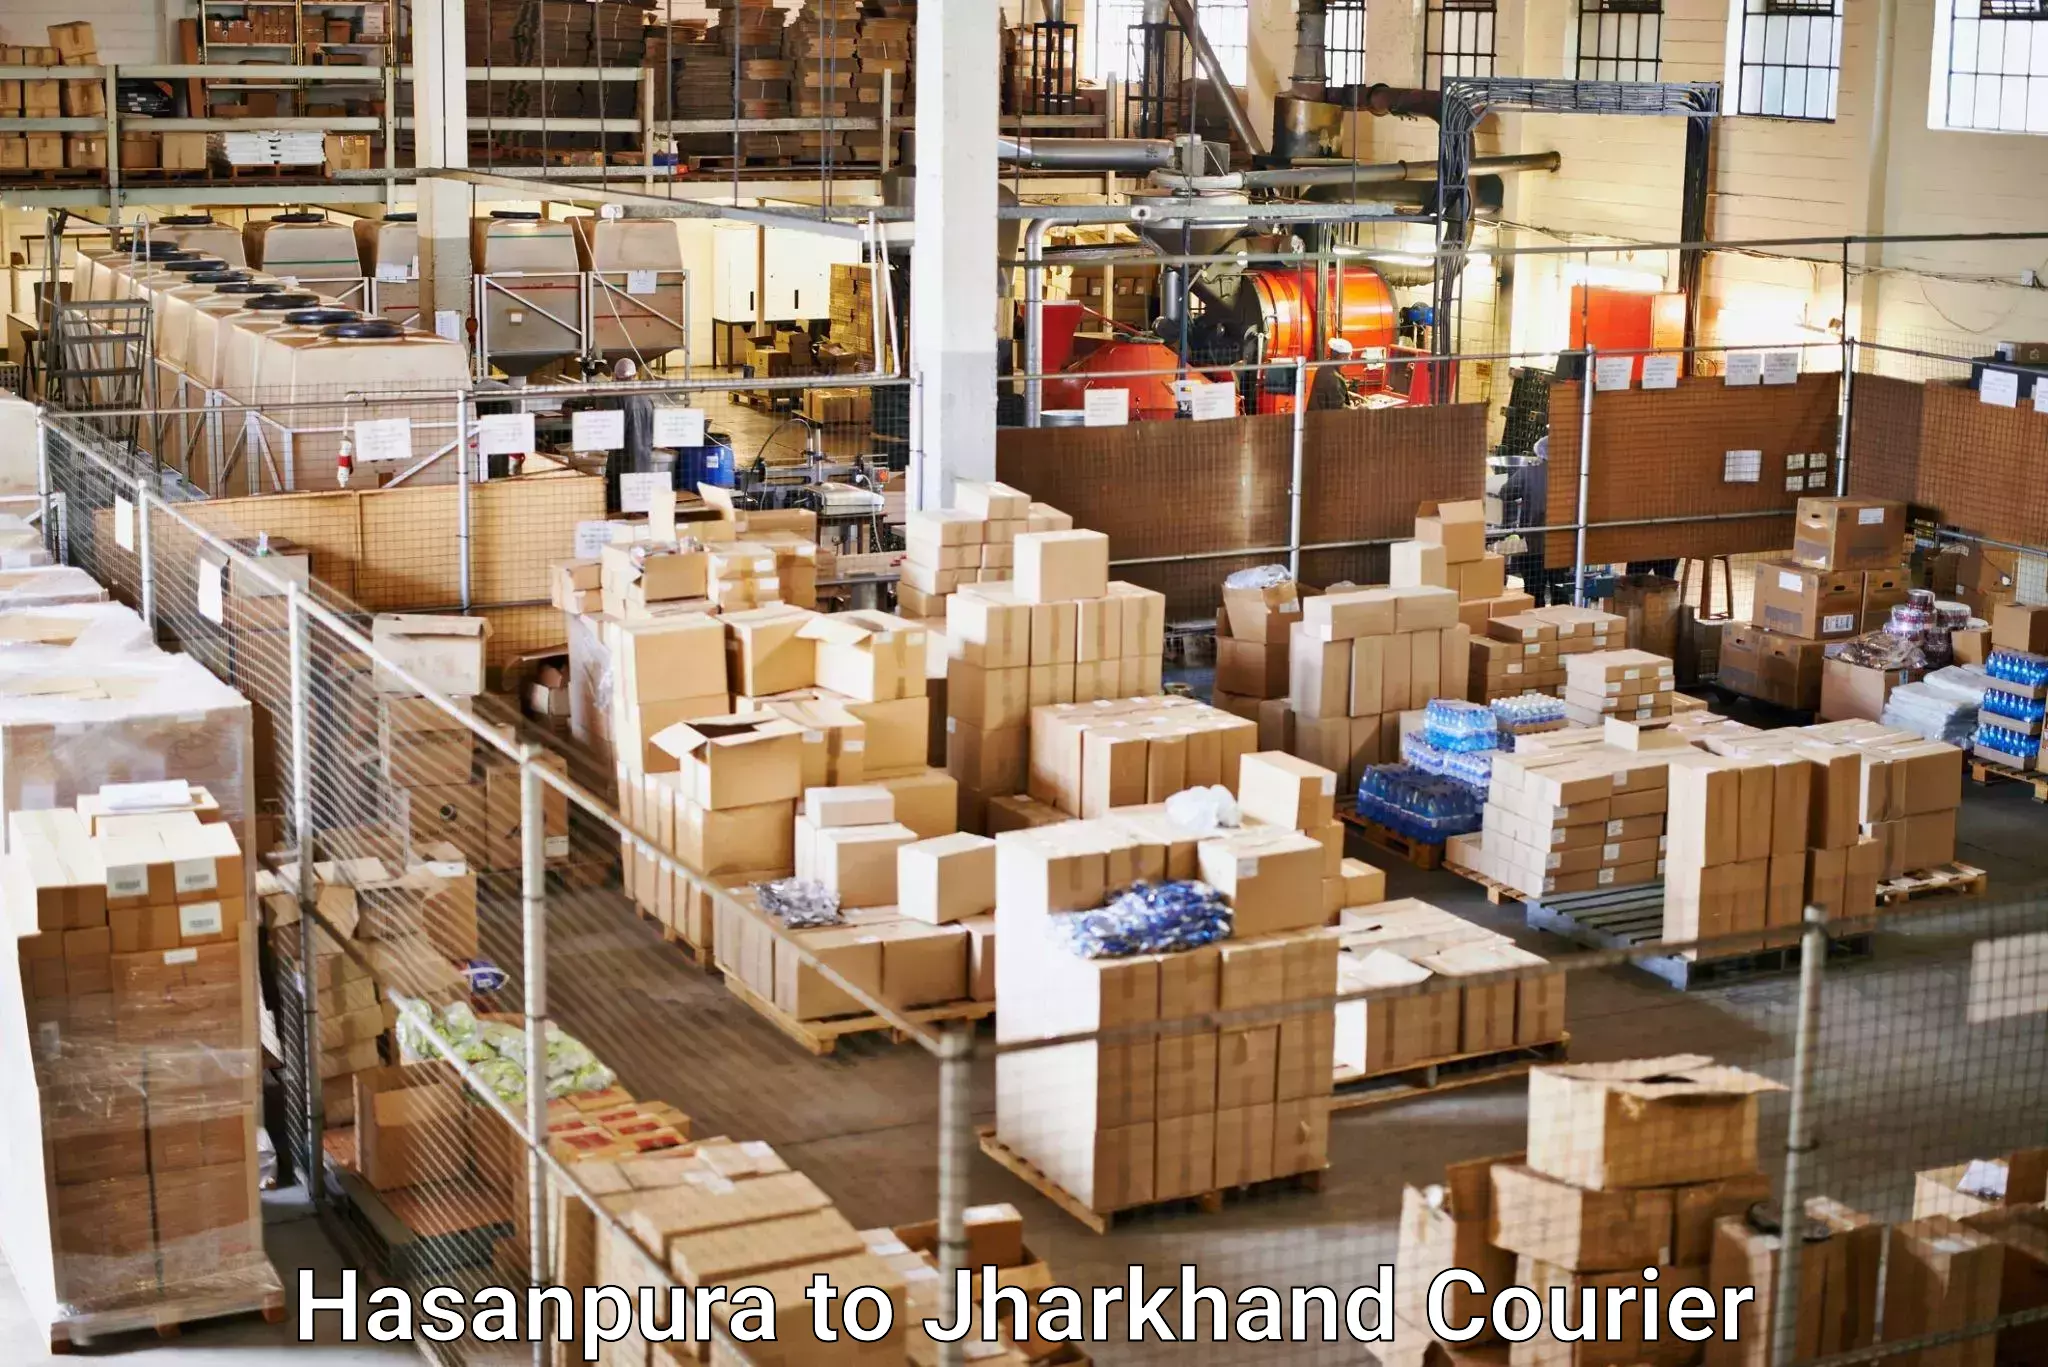 Express delivery capabilities Hasanpura to Chandil